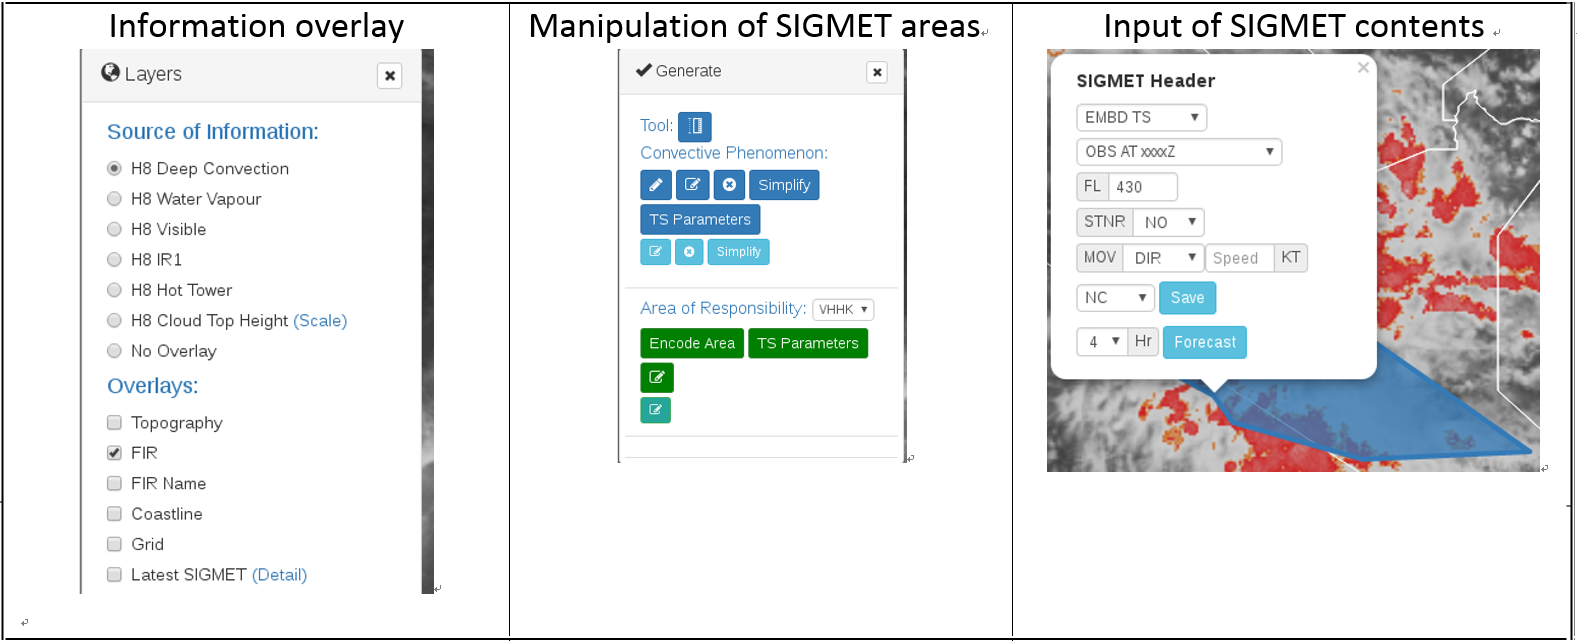 Various tools for weather monitoring, coordination and SIGMET generation available for "coordinated" SIGMET preparation.